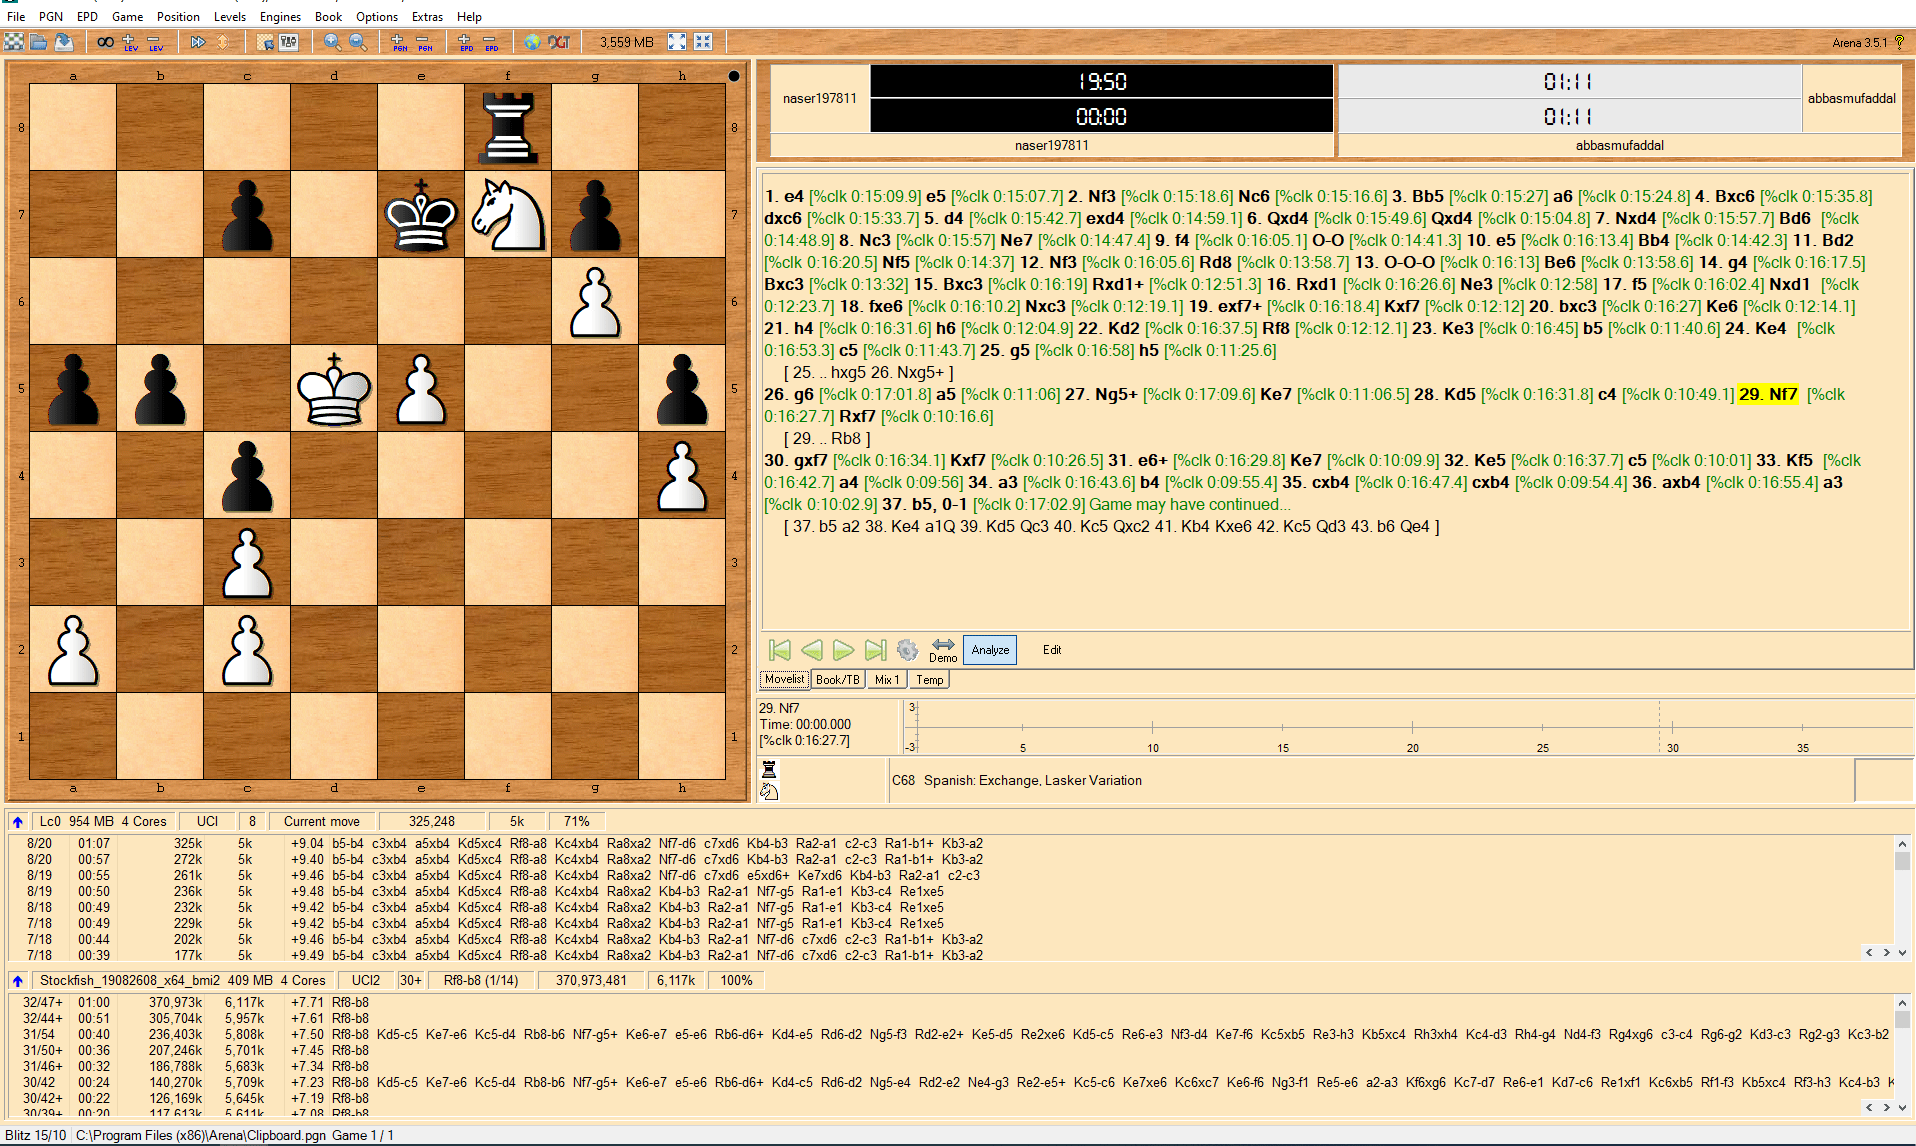 Why doing the Engine suggested move worsen my position? - Chess Stack  Exchange